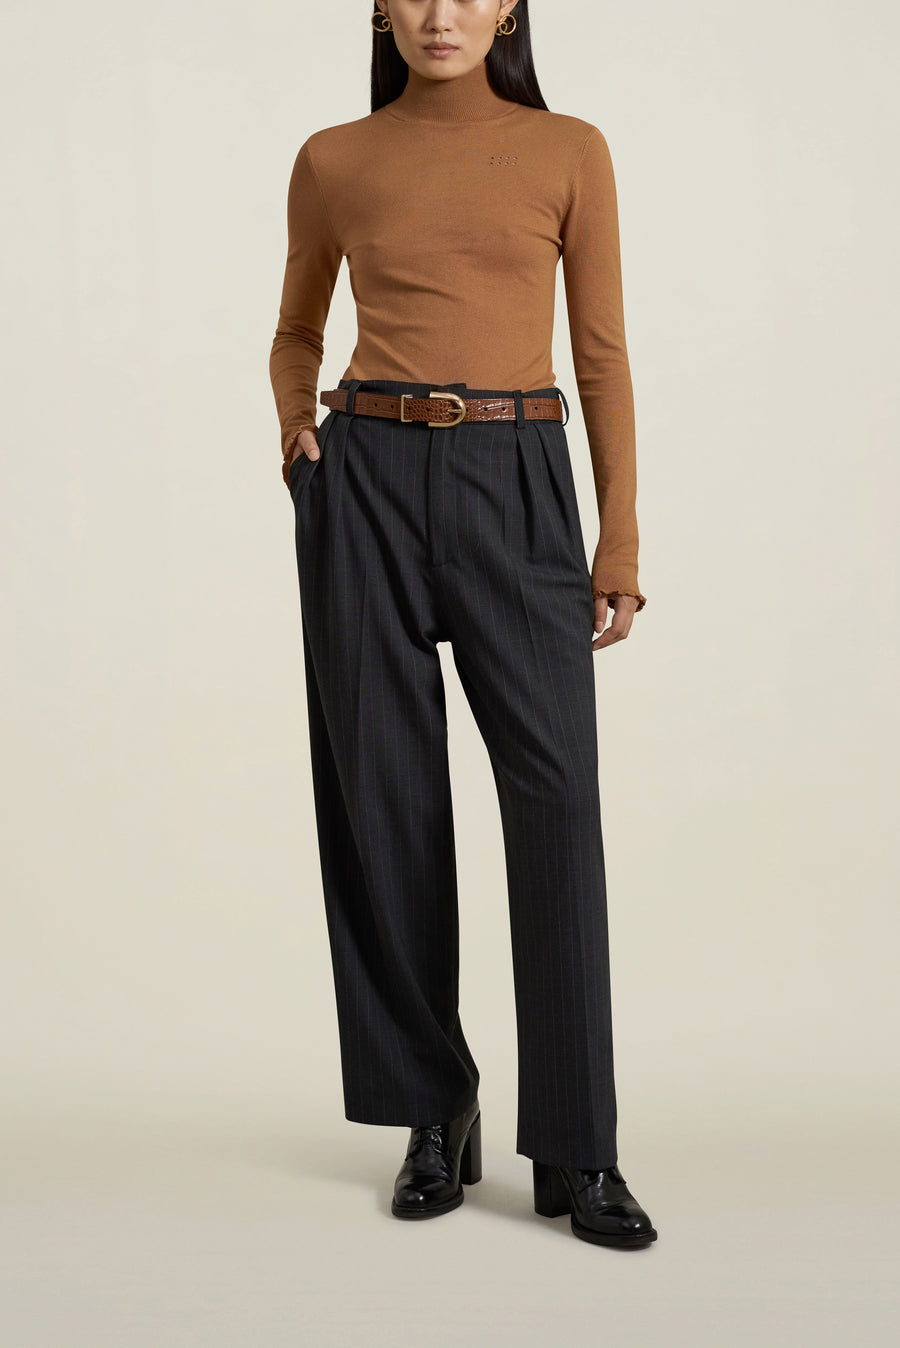 Houghton Pleated Trouser in Tropical Wool